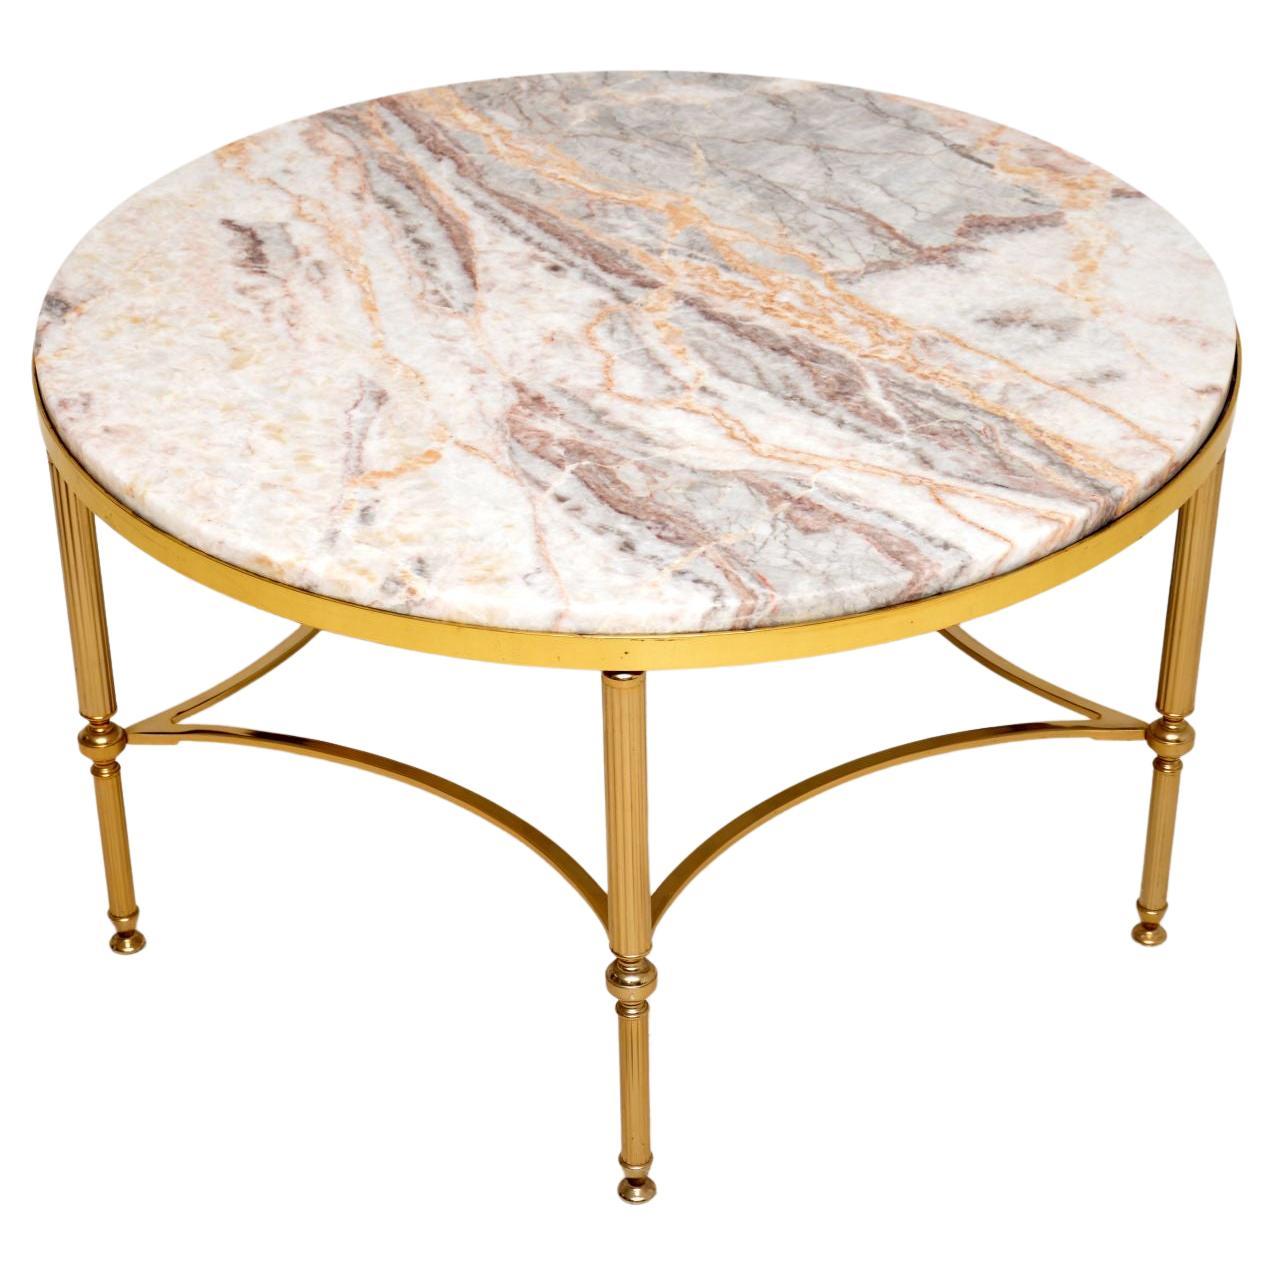 1970's Vintage Italian Brass & Marble Coffee Table For Sale